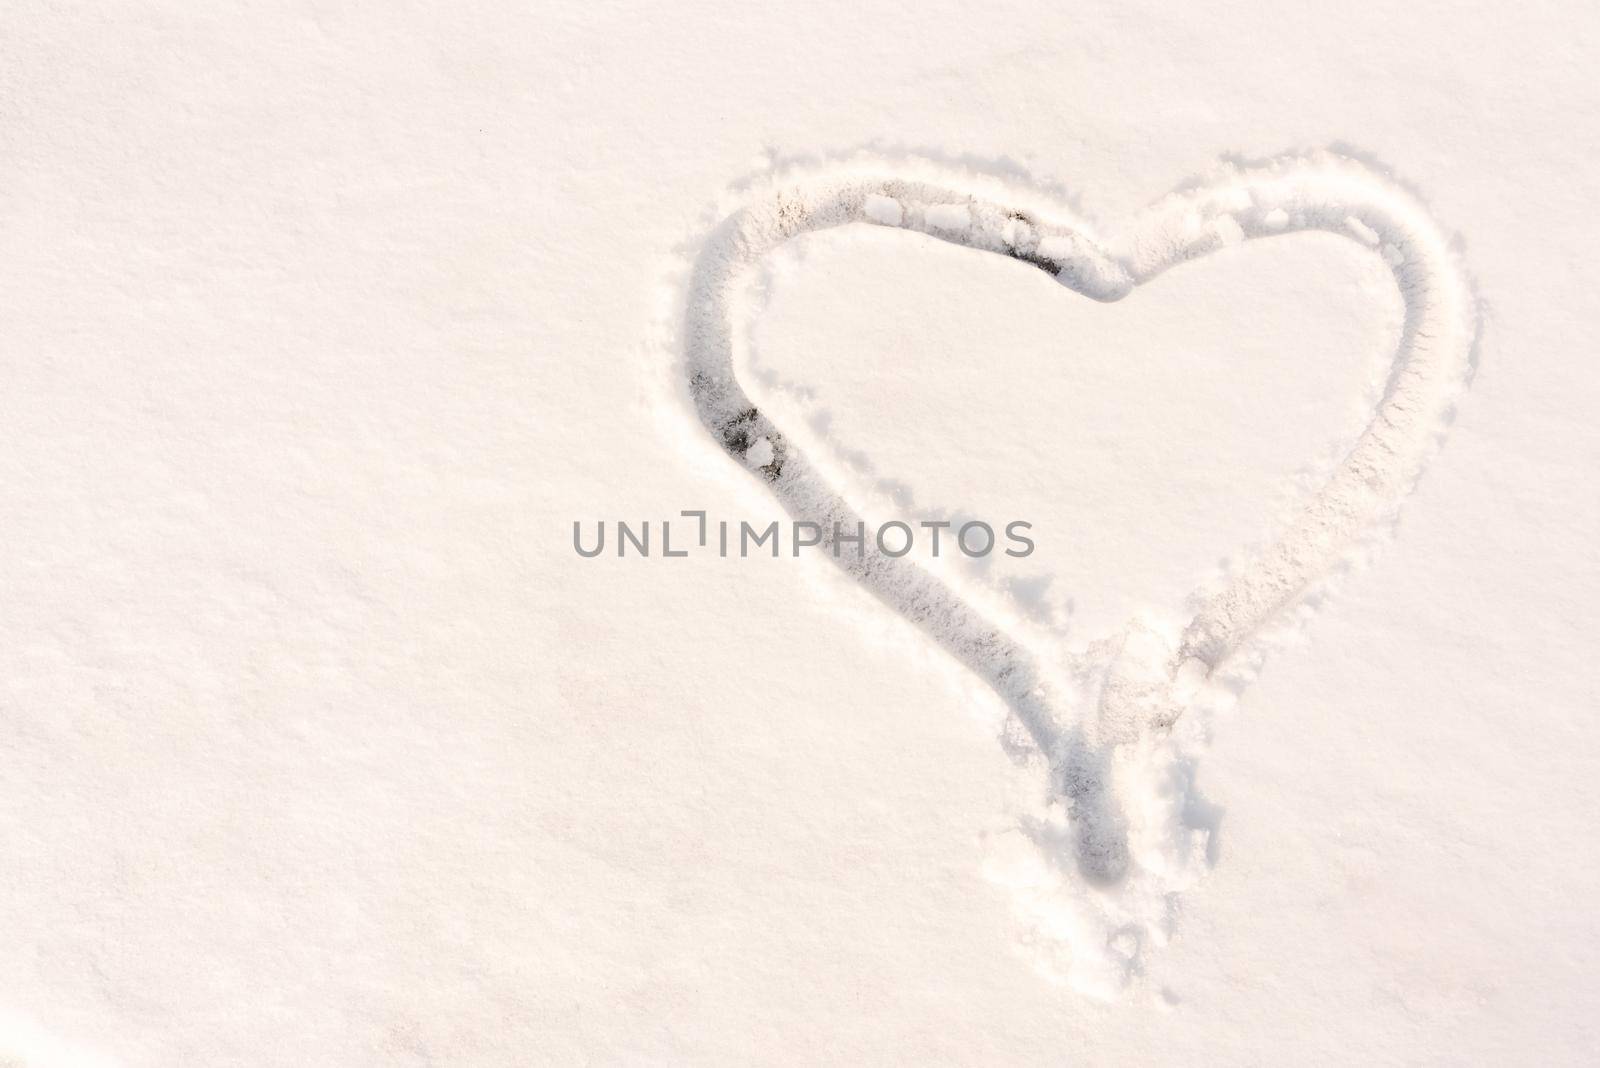 The symbol of the heart, painted on the fresh white snow with copy space.